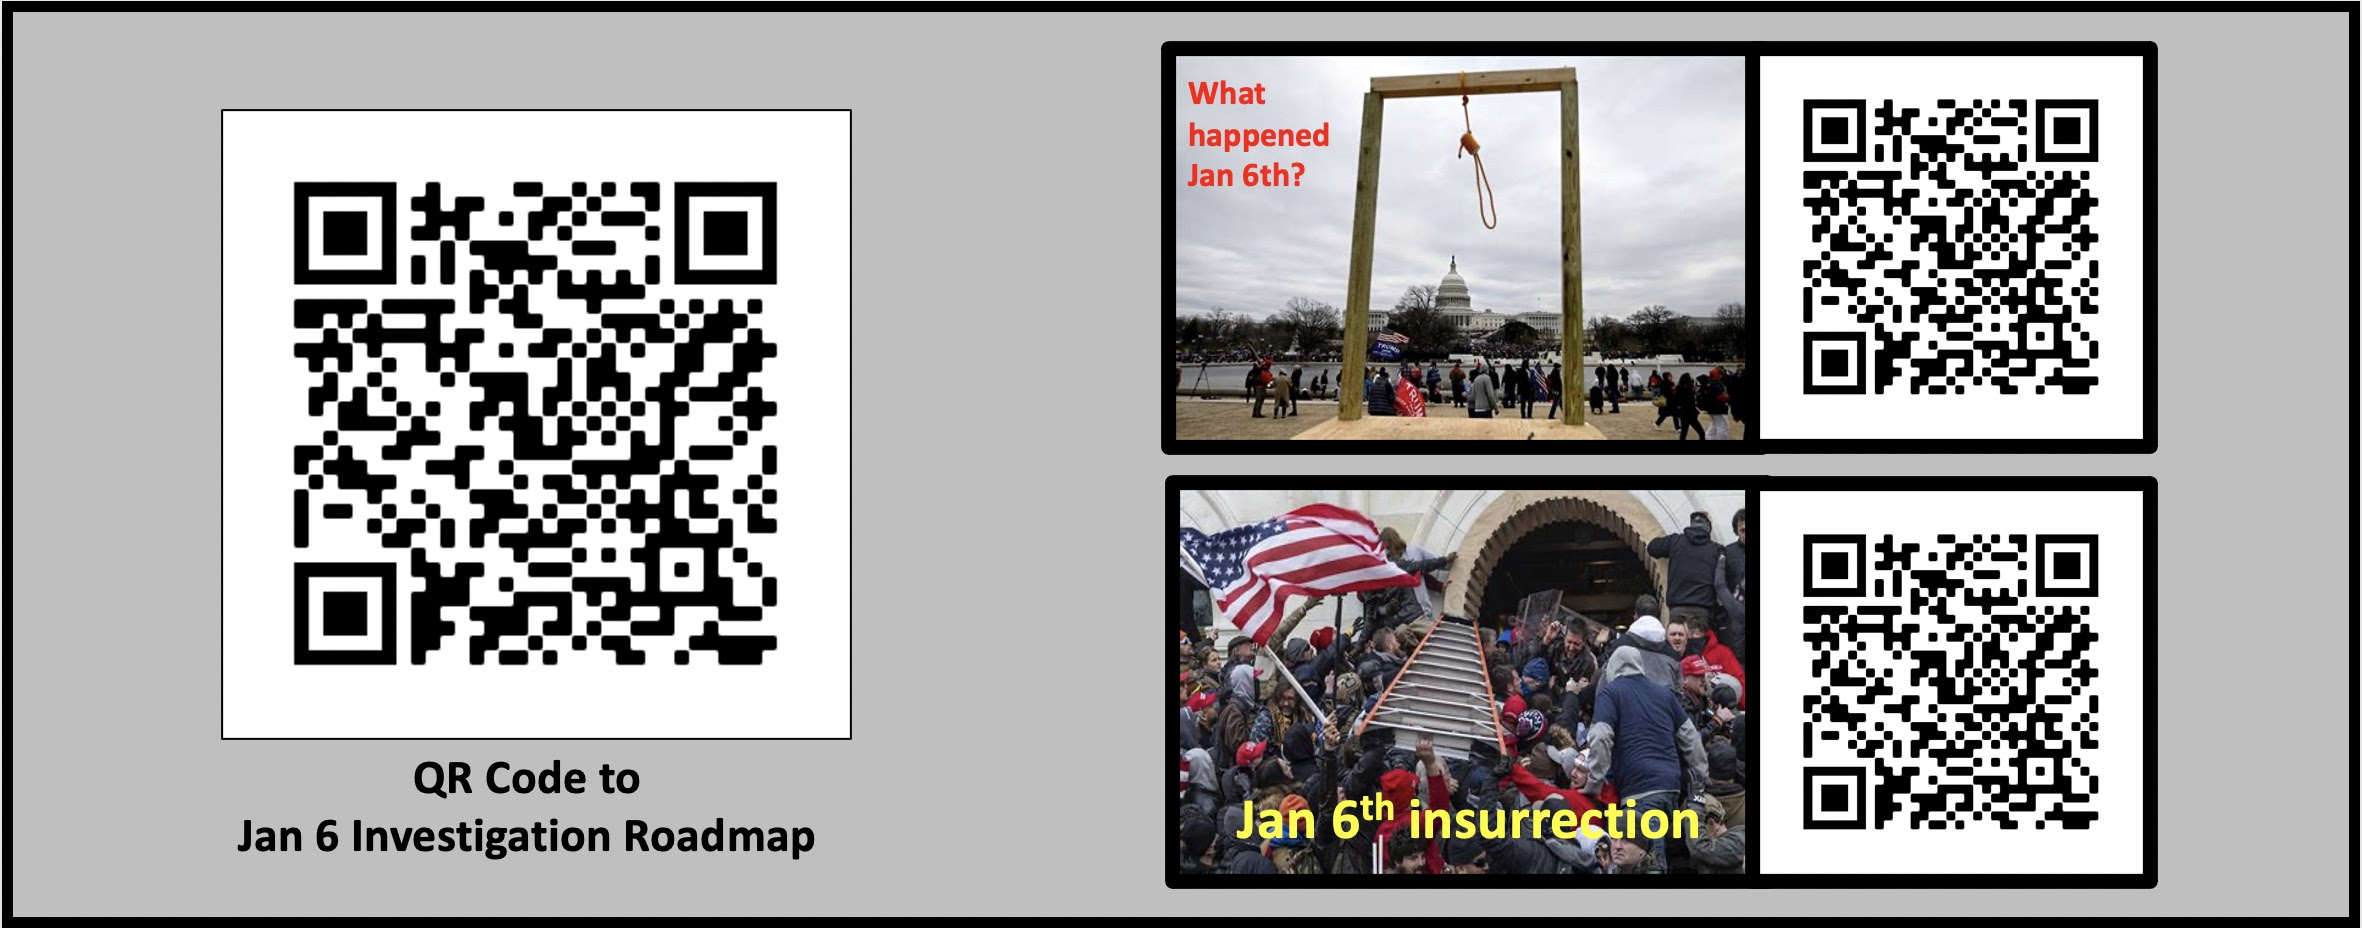 Use QR Codes to make it easy for people to share your message with others.